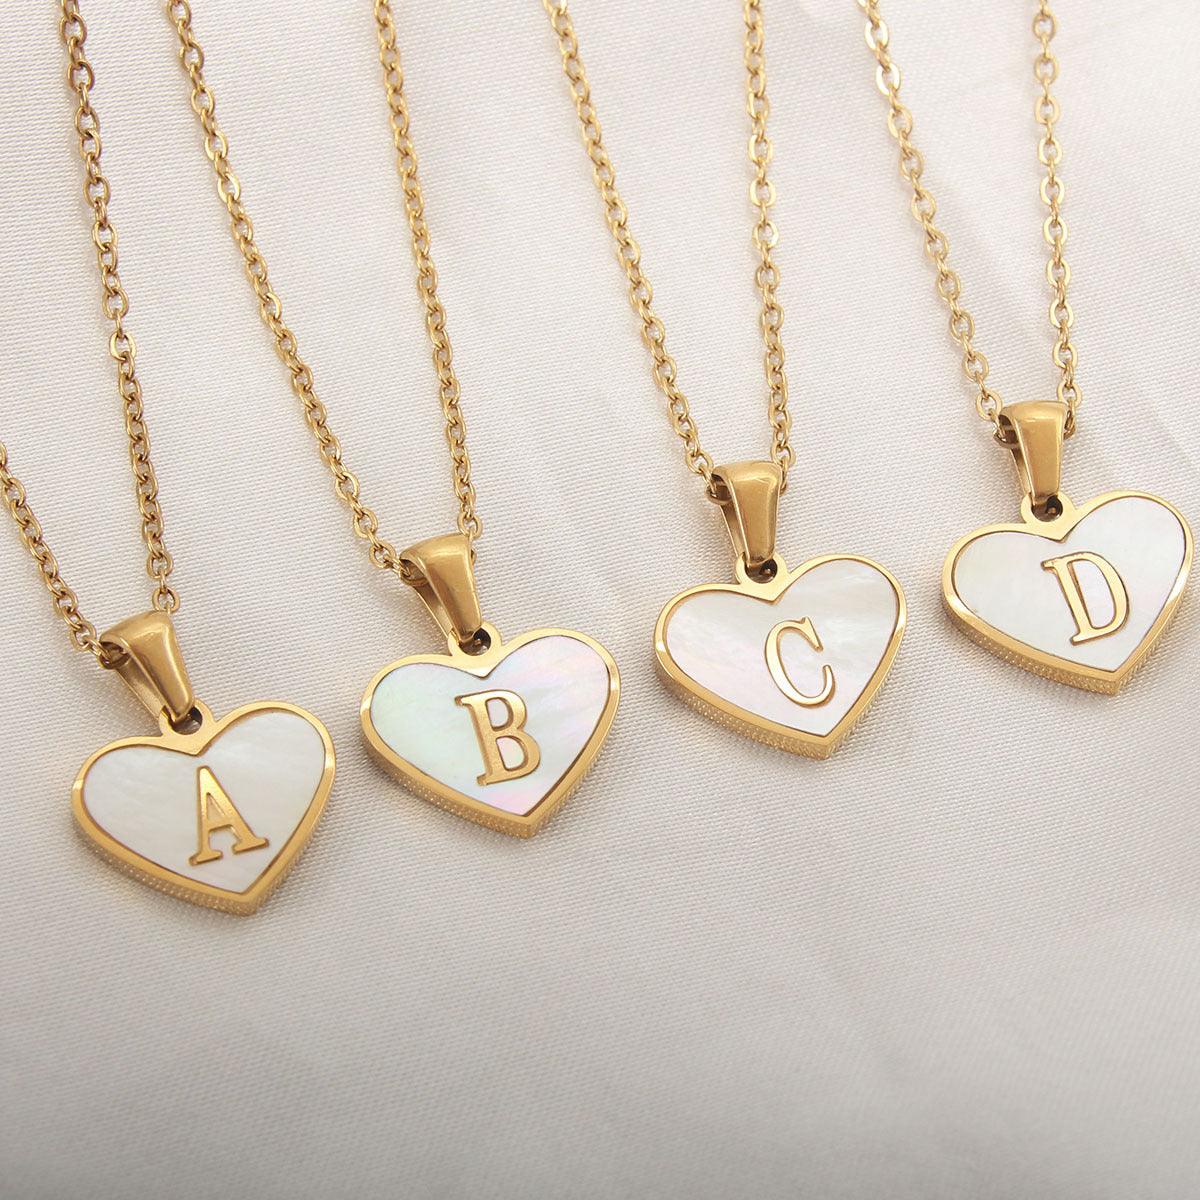 26 Letter Heart-shaped Necklace White Shell Love Clavicle Chain Fashion Personalized Necklace For Women Jewelry Valentine's Day - AVINCET